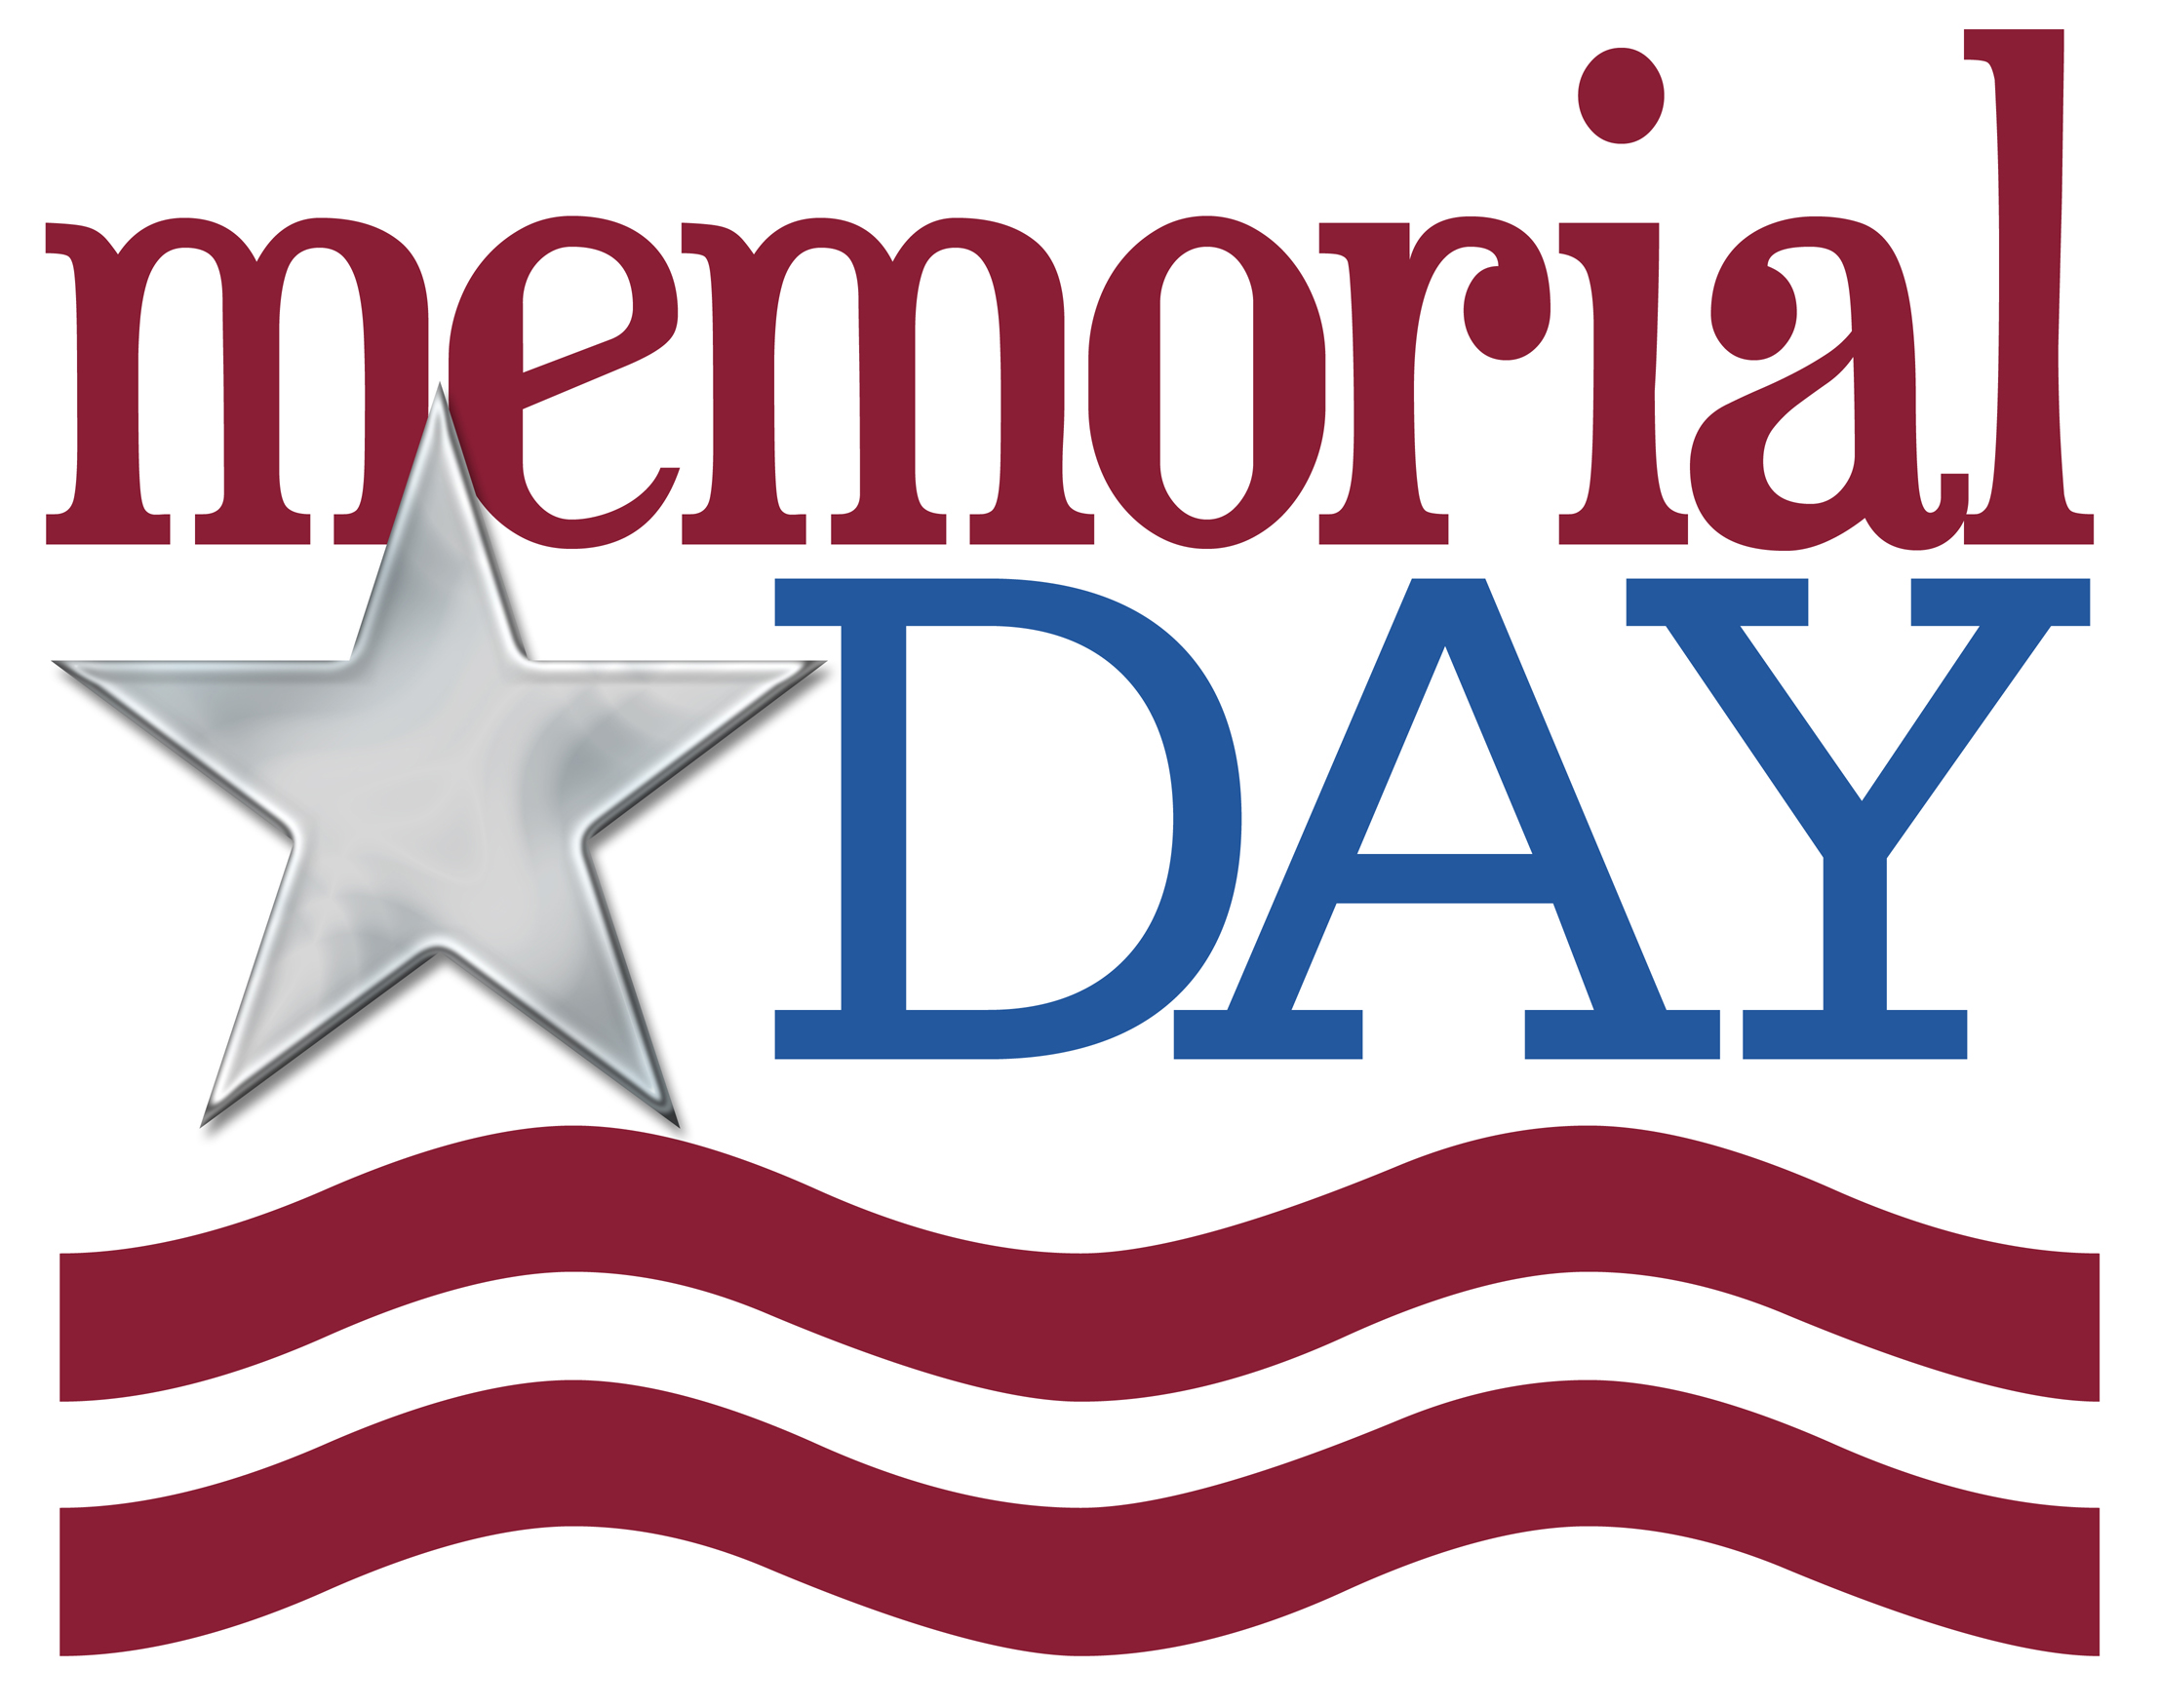 May Memorial Day Hd Background 9 HD Wallpapers | aduphoto.